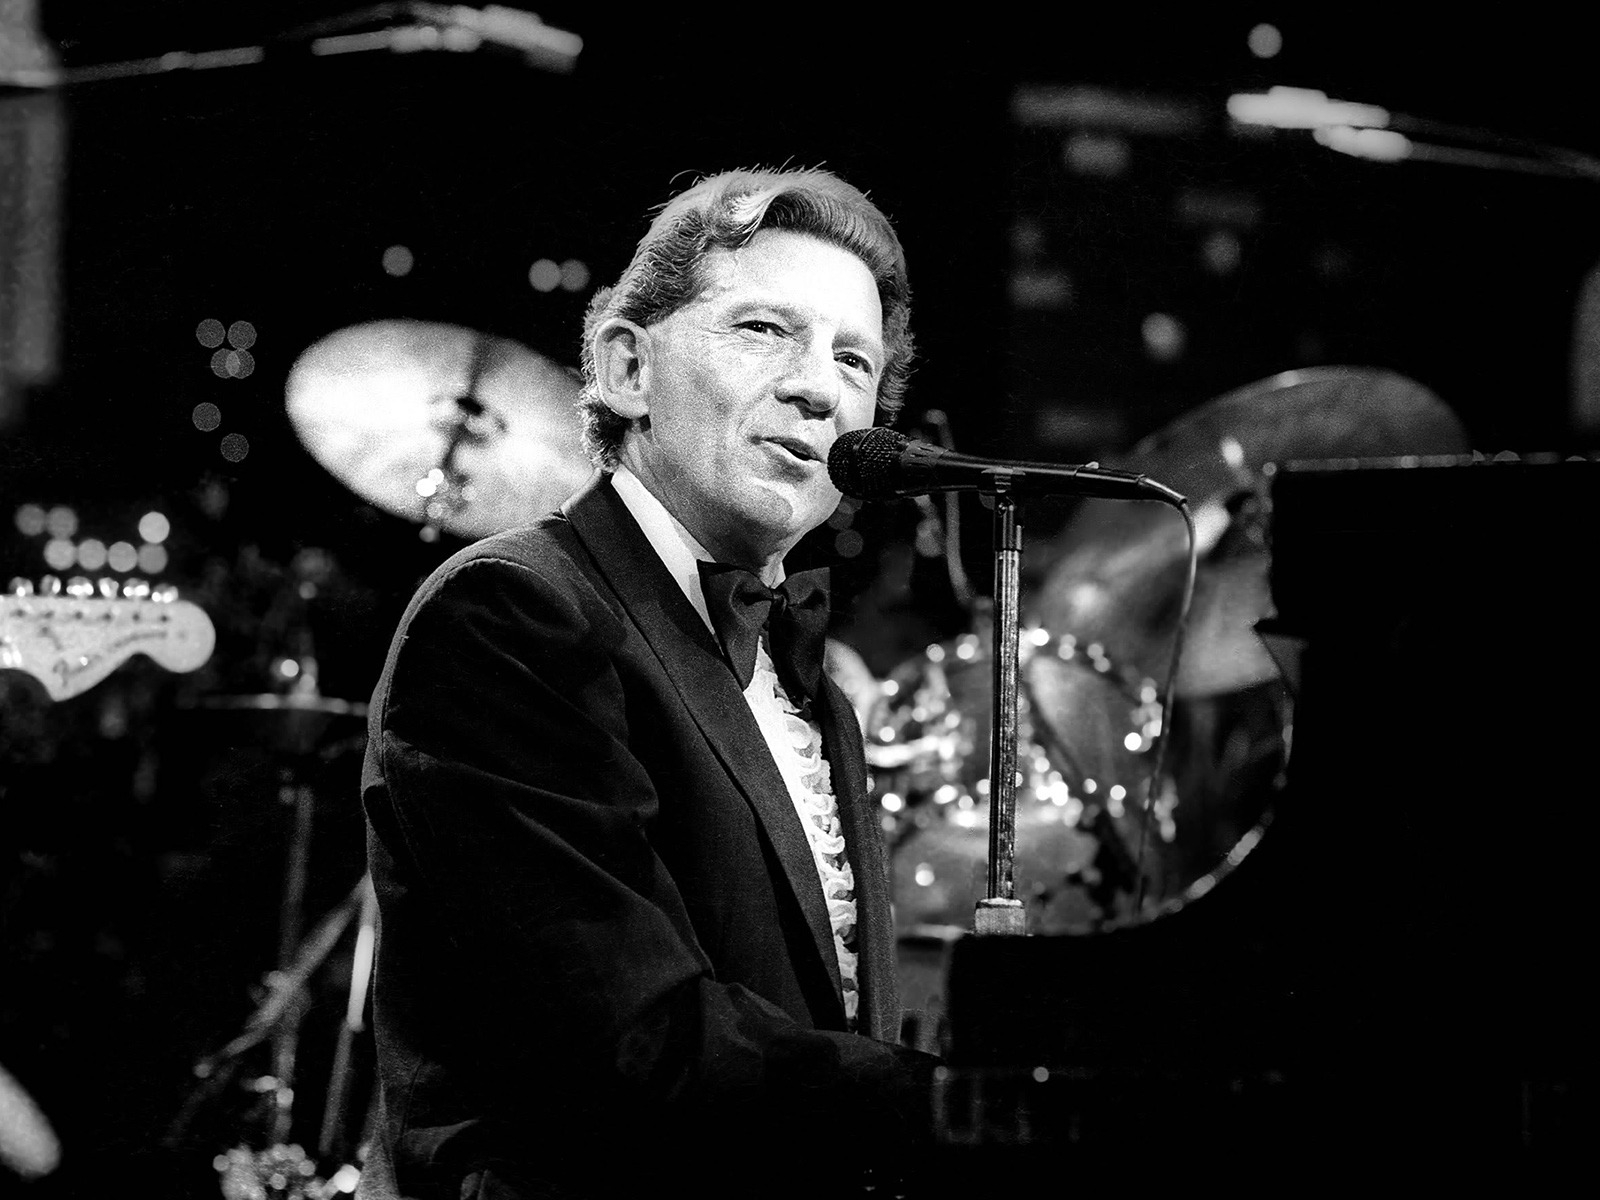 Jerry Lee Lewis for 1600 x 1200 resolution